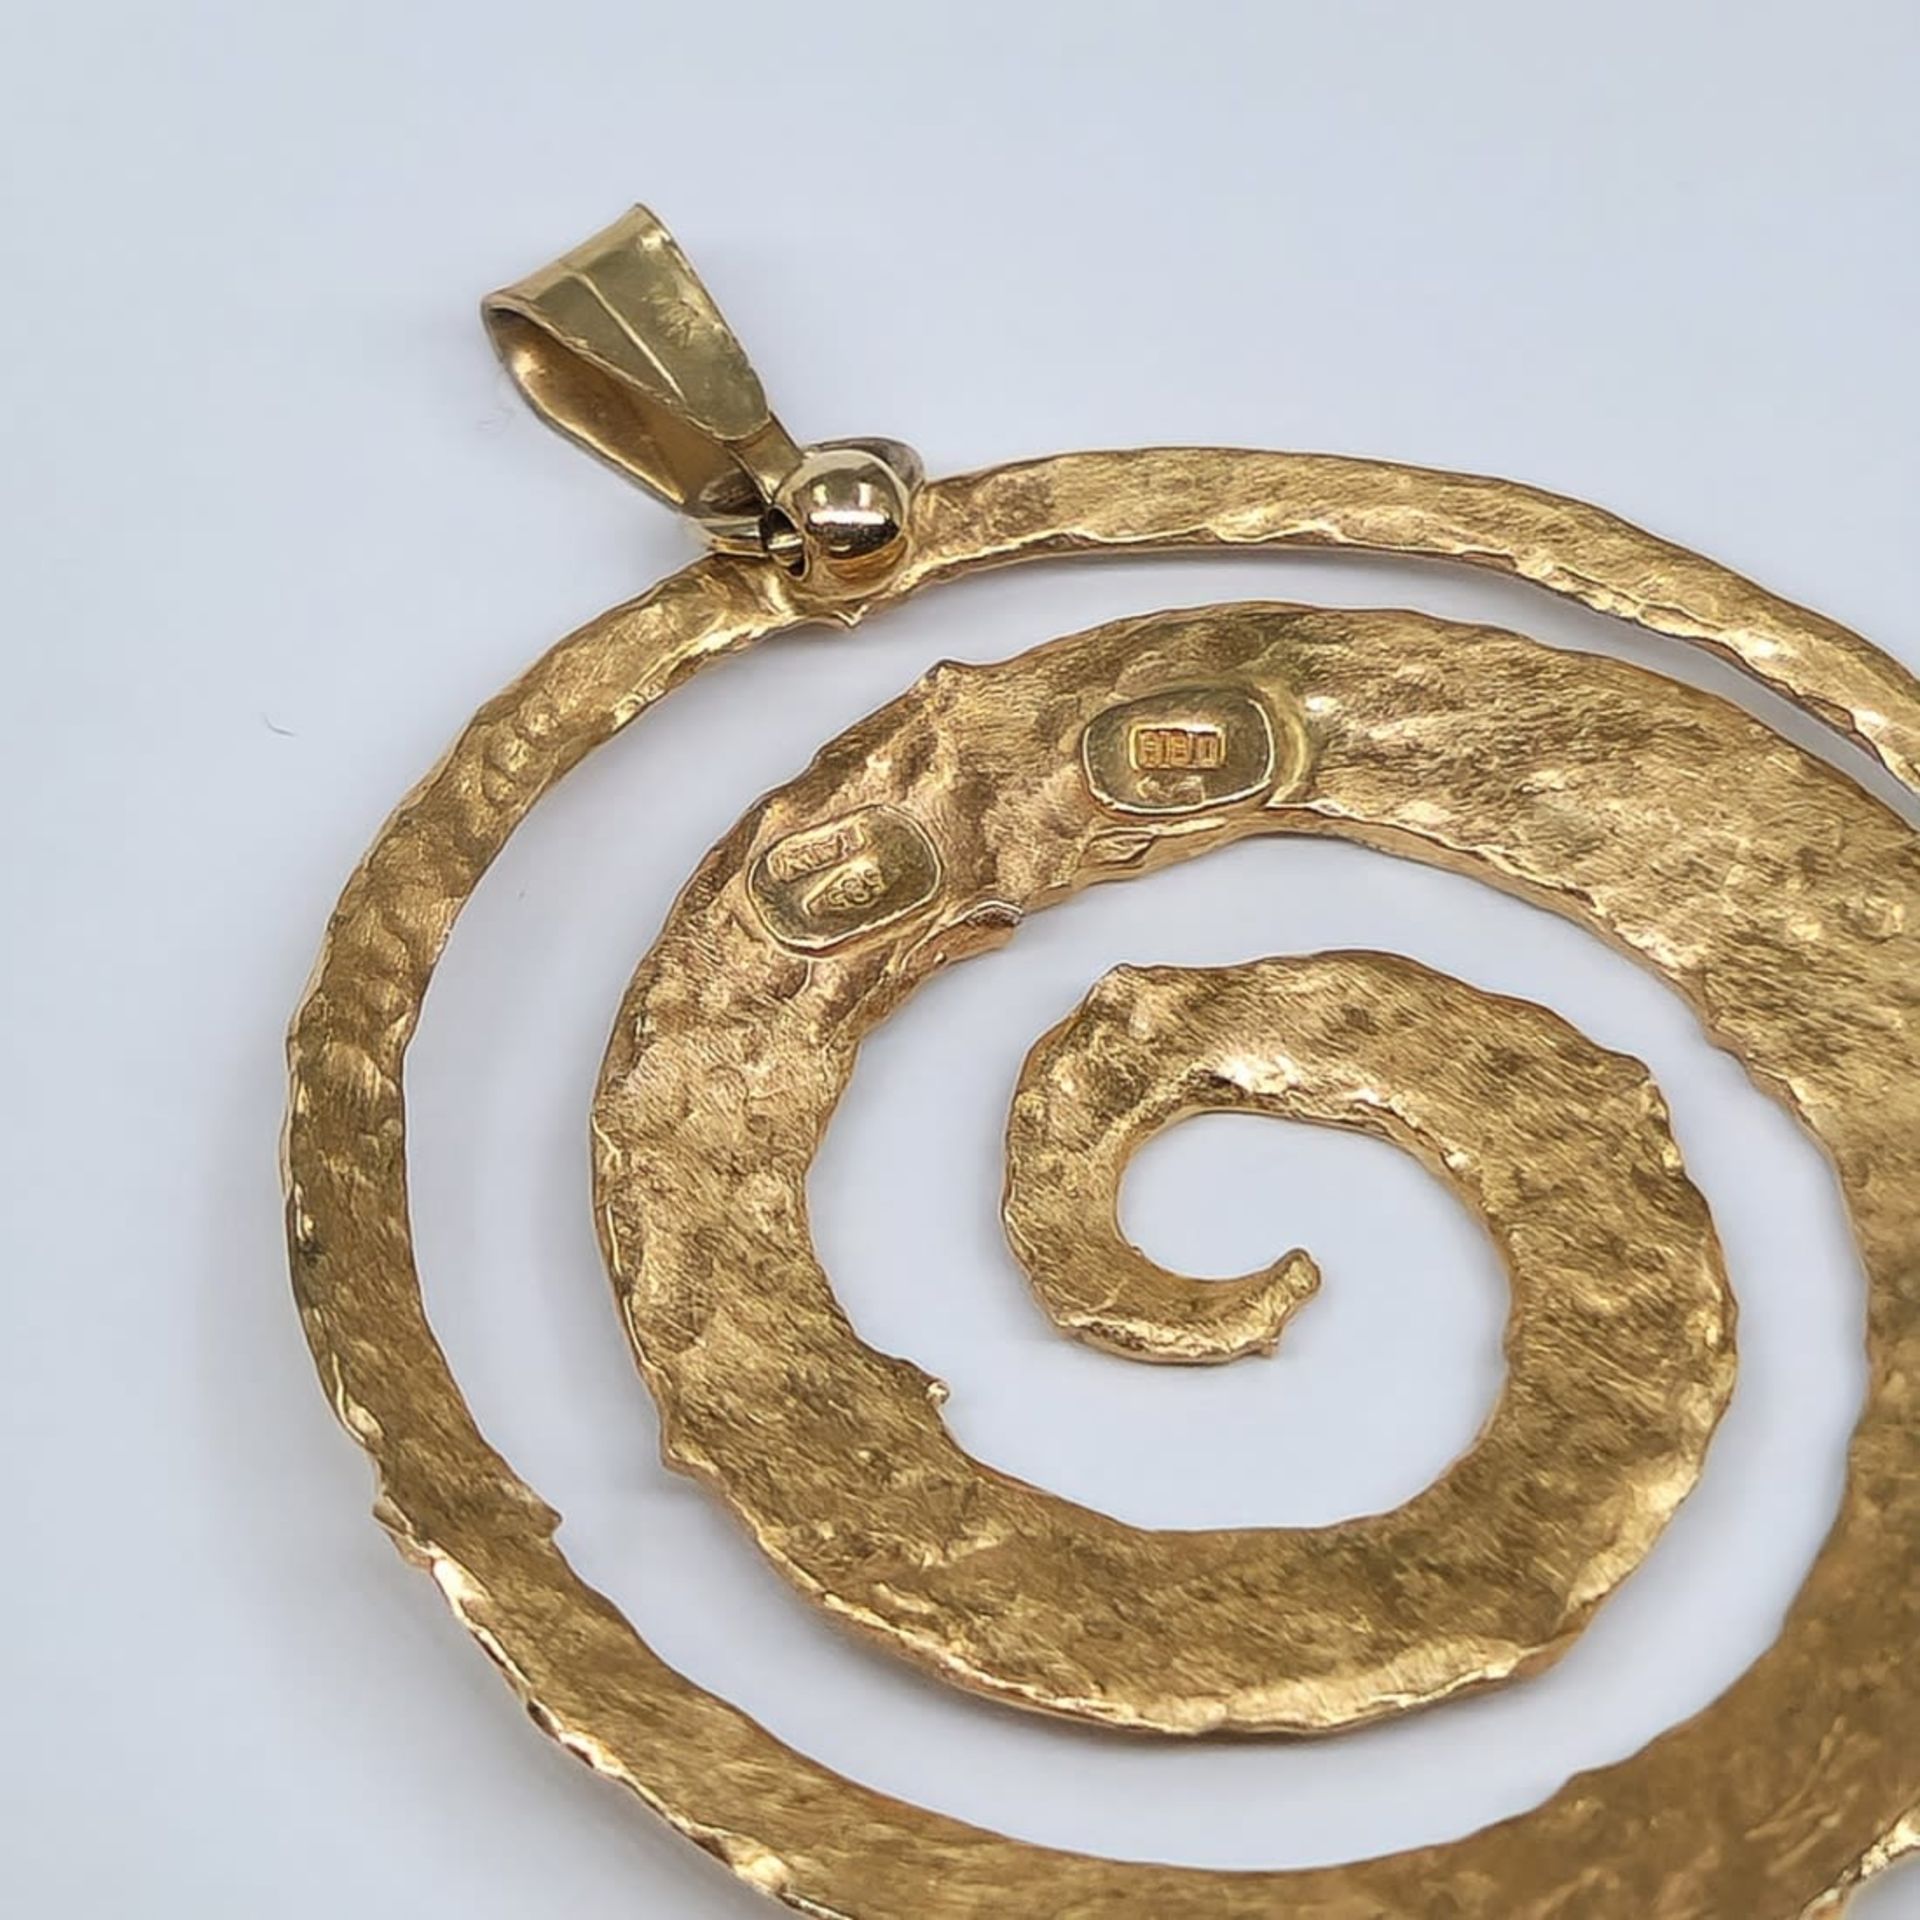 14K gold pendant of a spiral shape, signed, Weight: 5.78 grams, Diameter: 4 cm, Height including the - Image 4 of 4